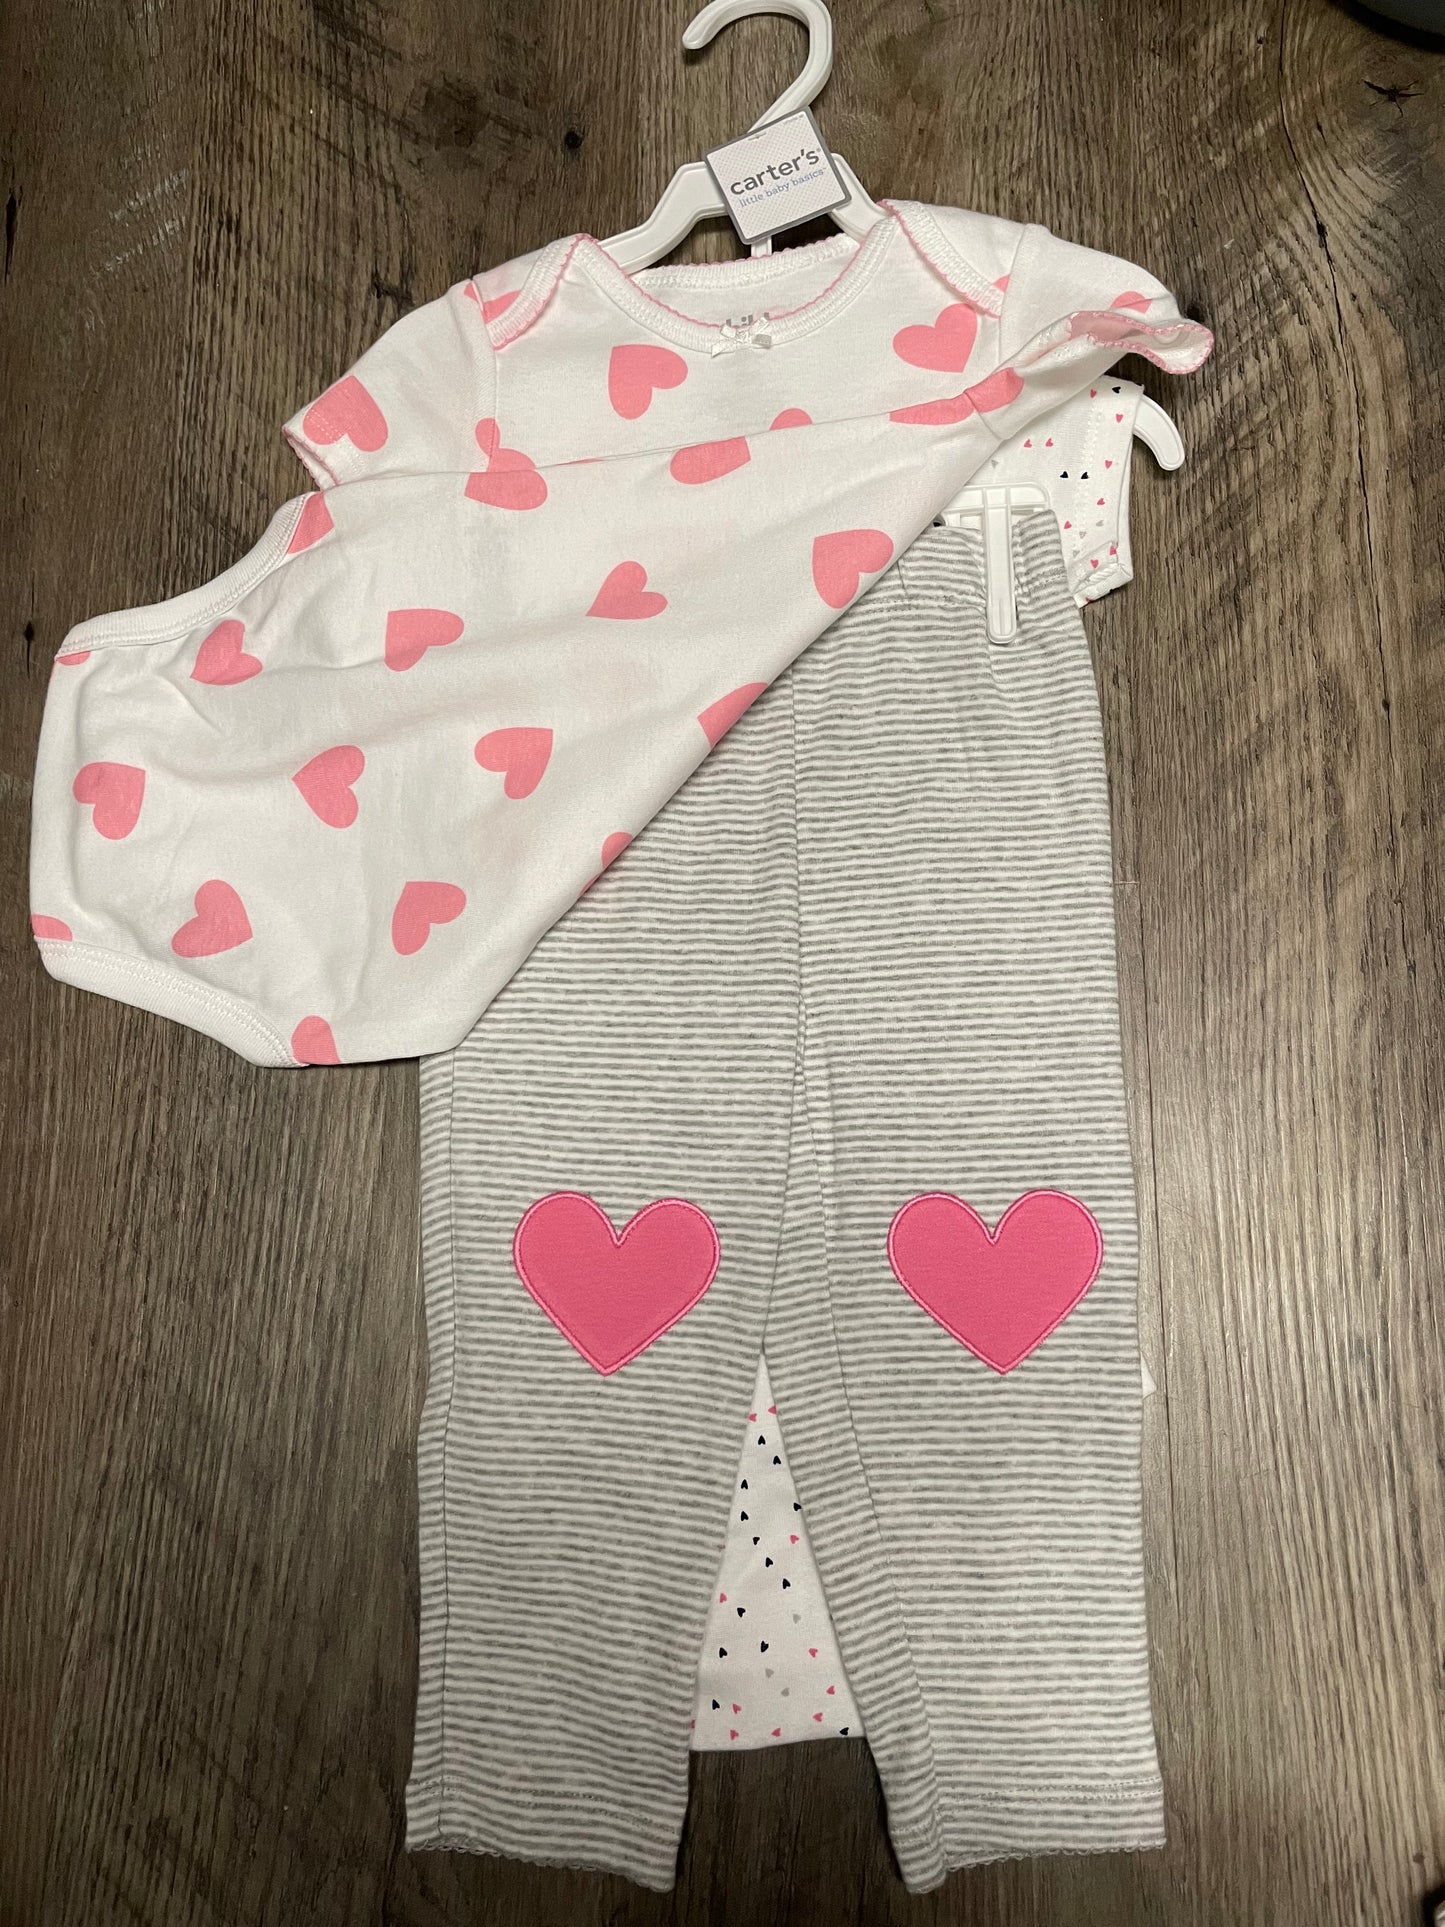 New Baby girl 18 months carters three piece set